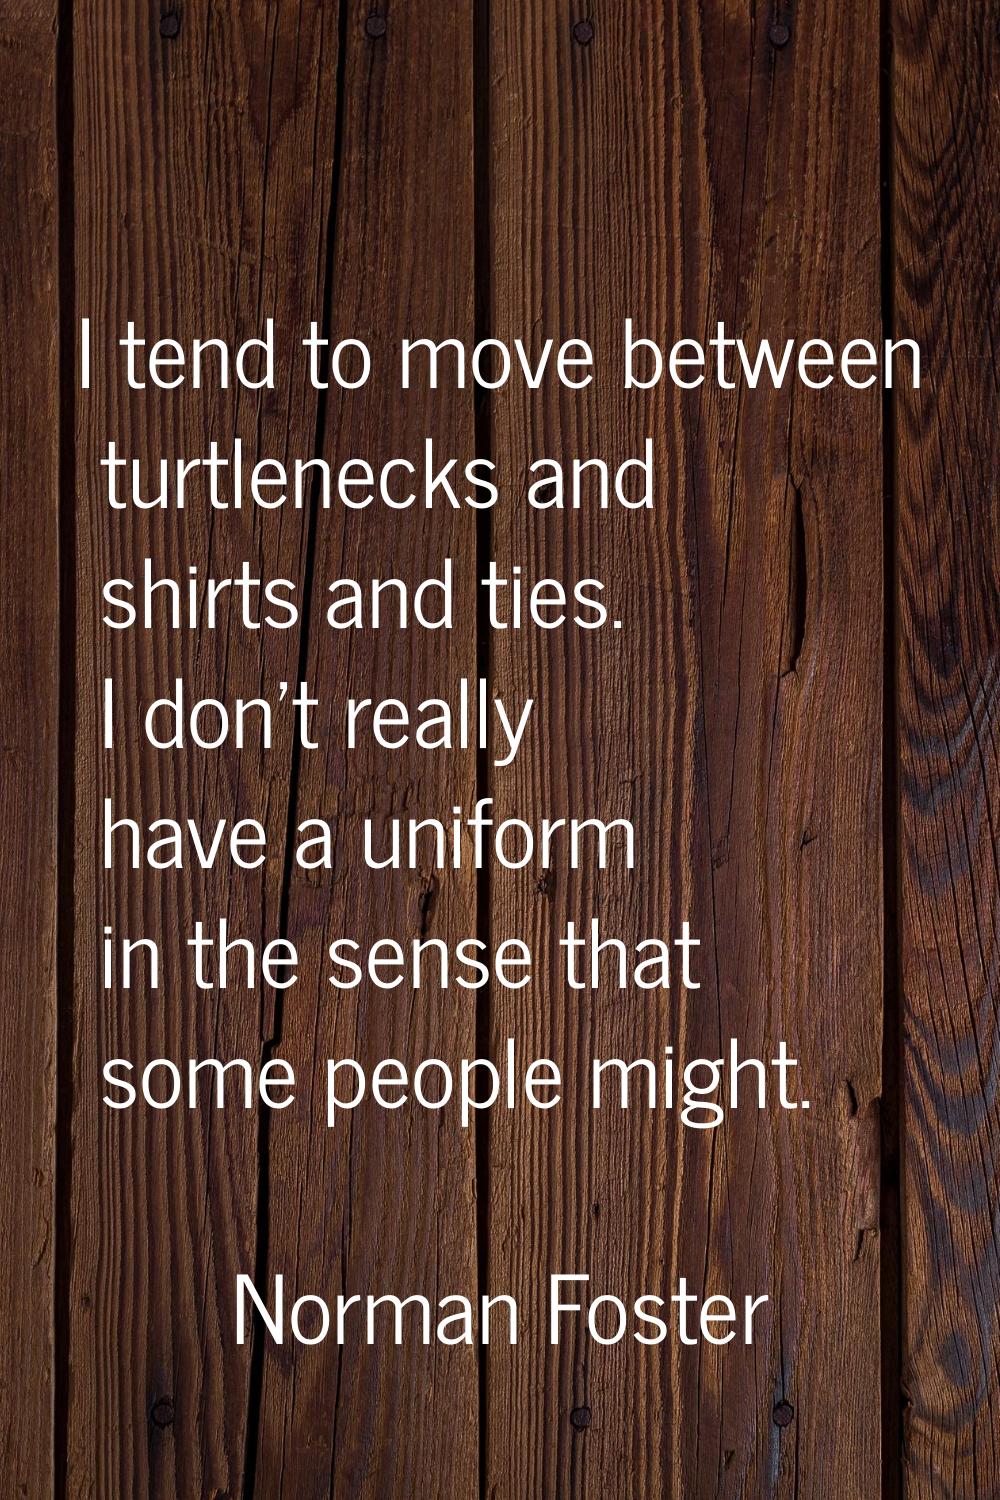 I tend to move between turtlenecks and shirts and ties. I don't really have a uniform in the sense 